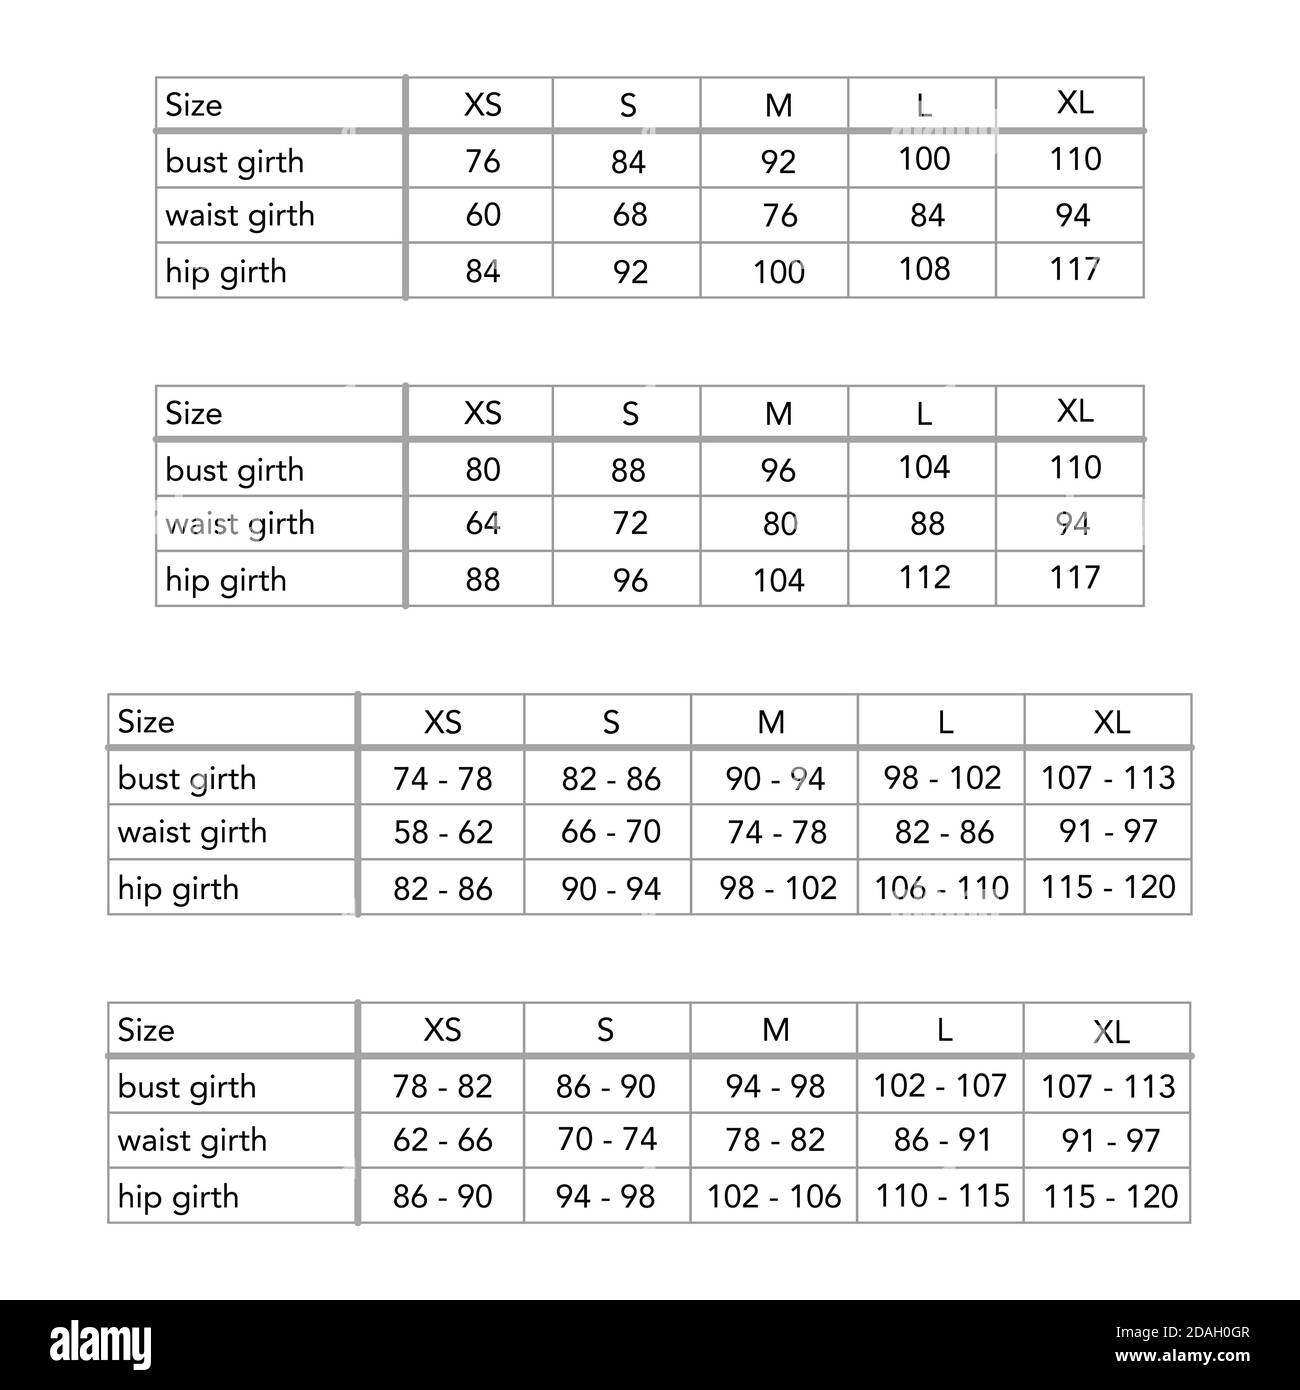 Women new European system clothing standard body measurements for